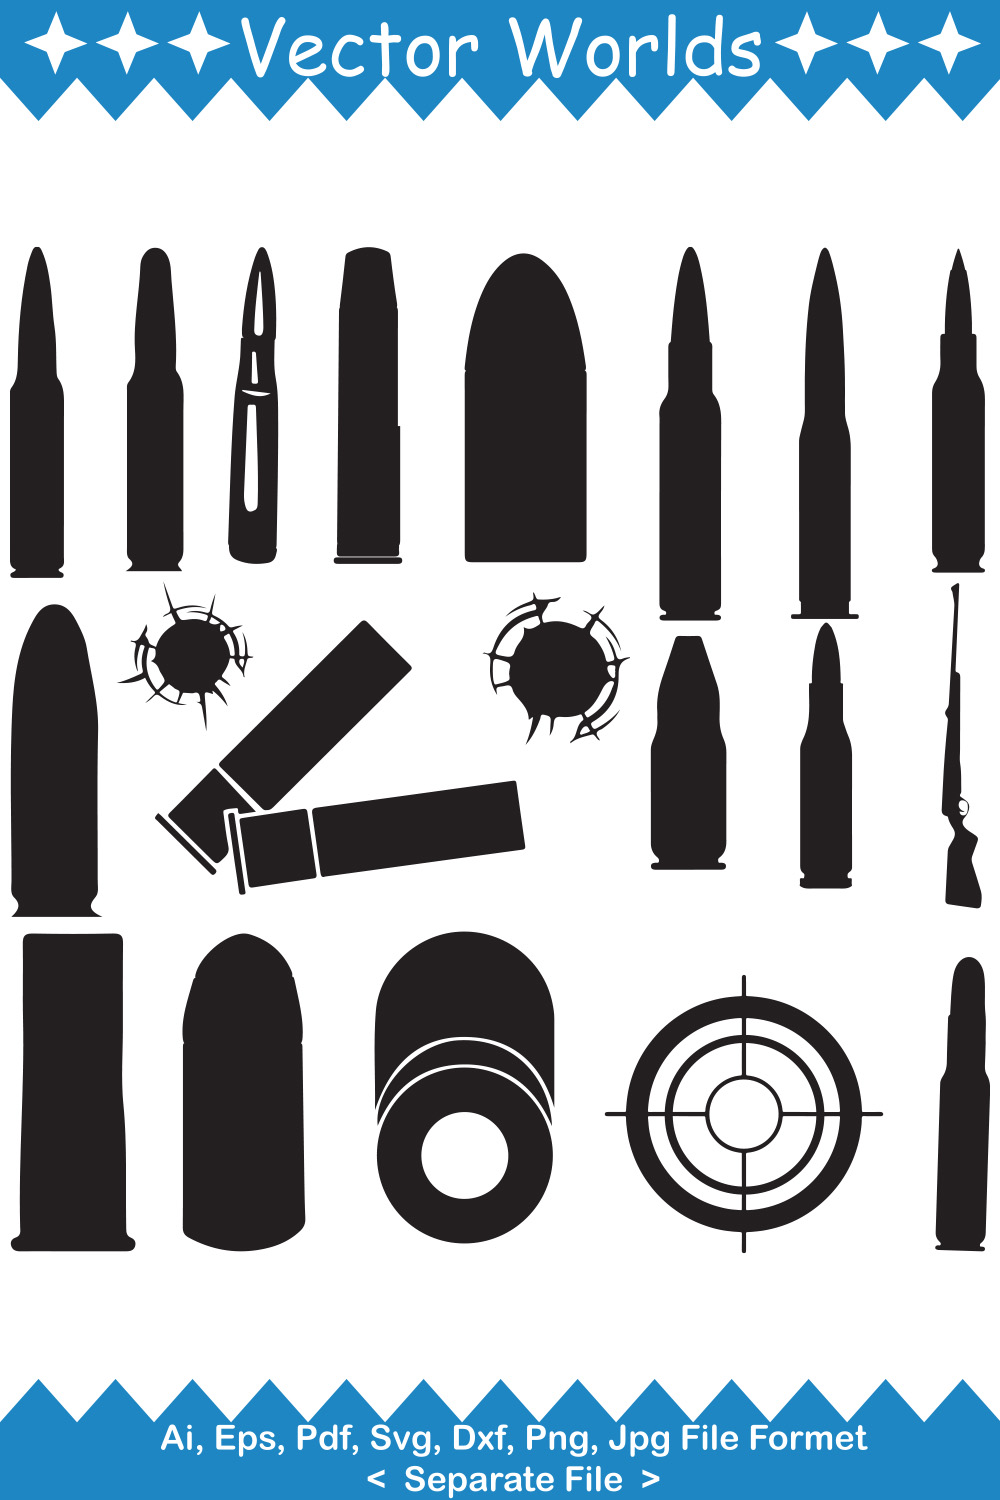 Bundle of vector amazing bullet silhouette images.